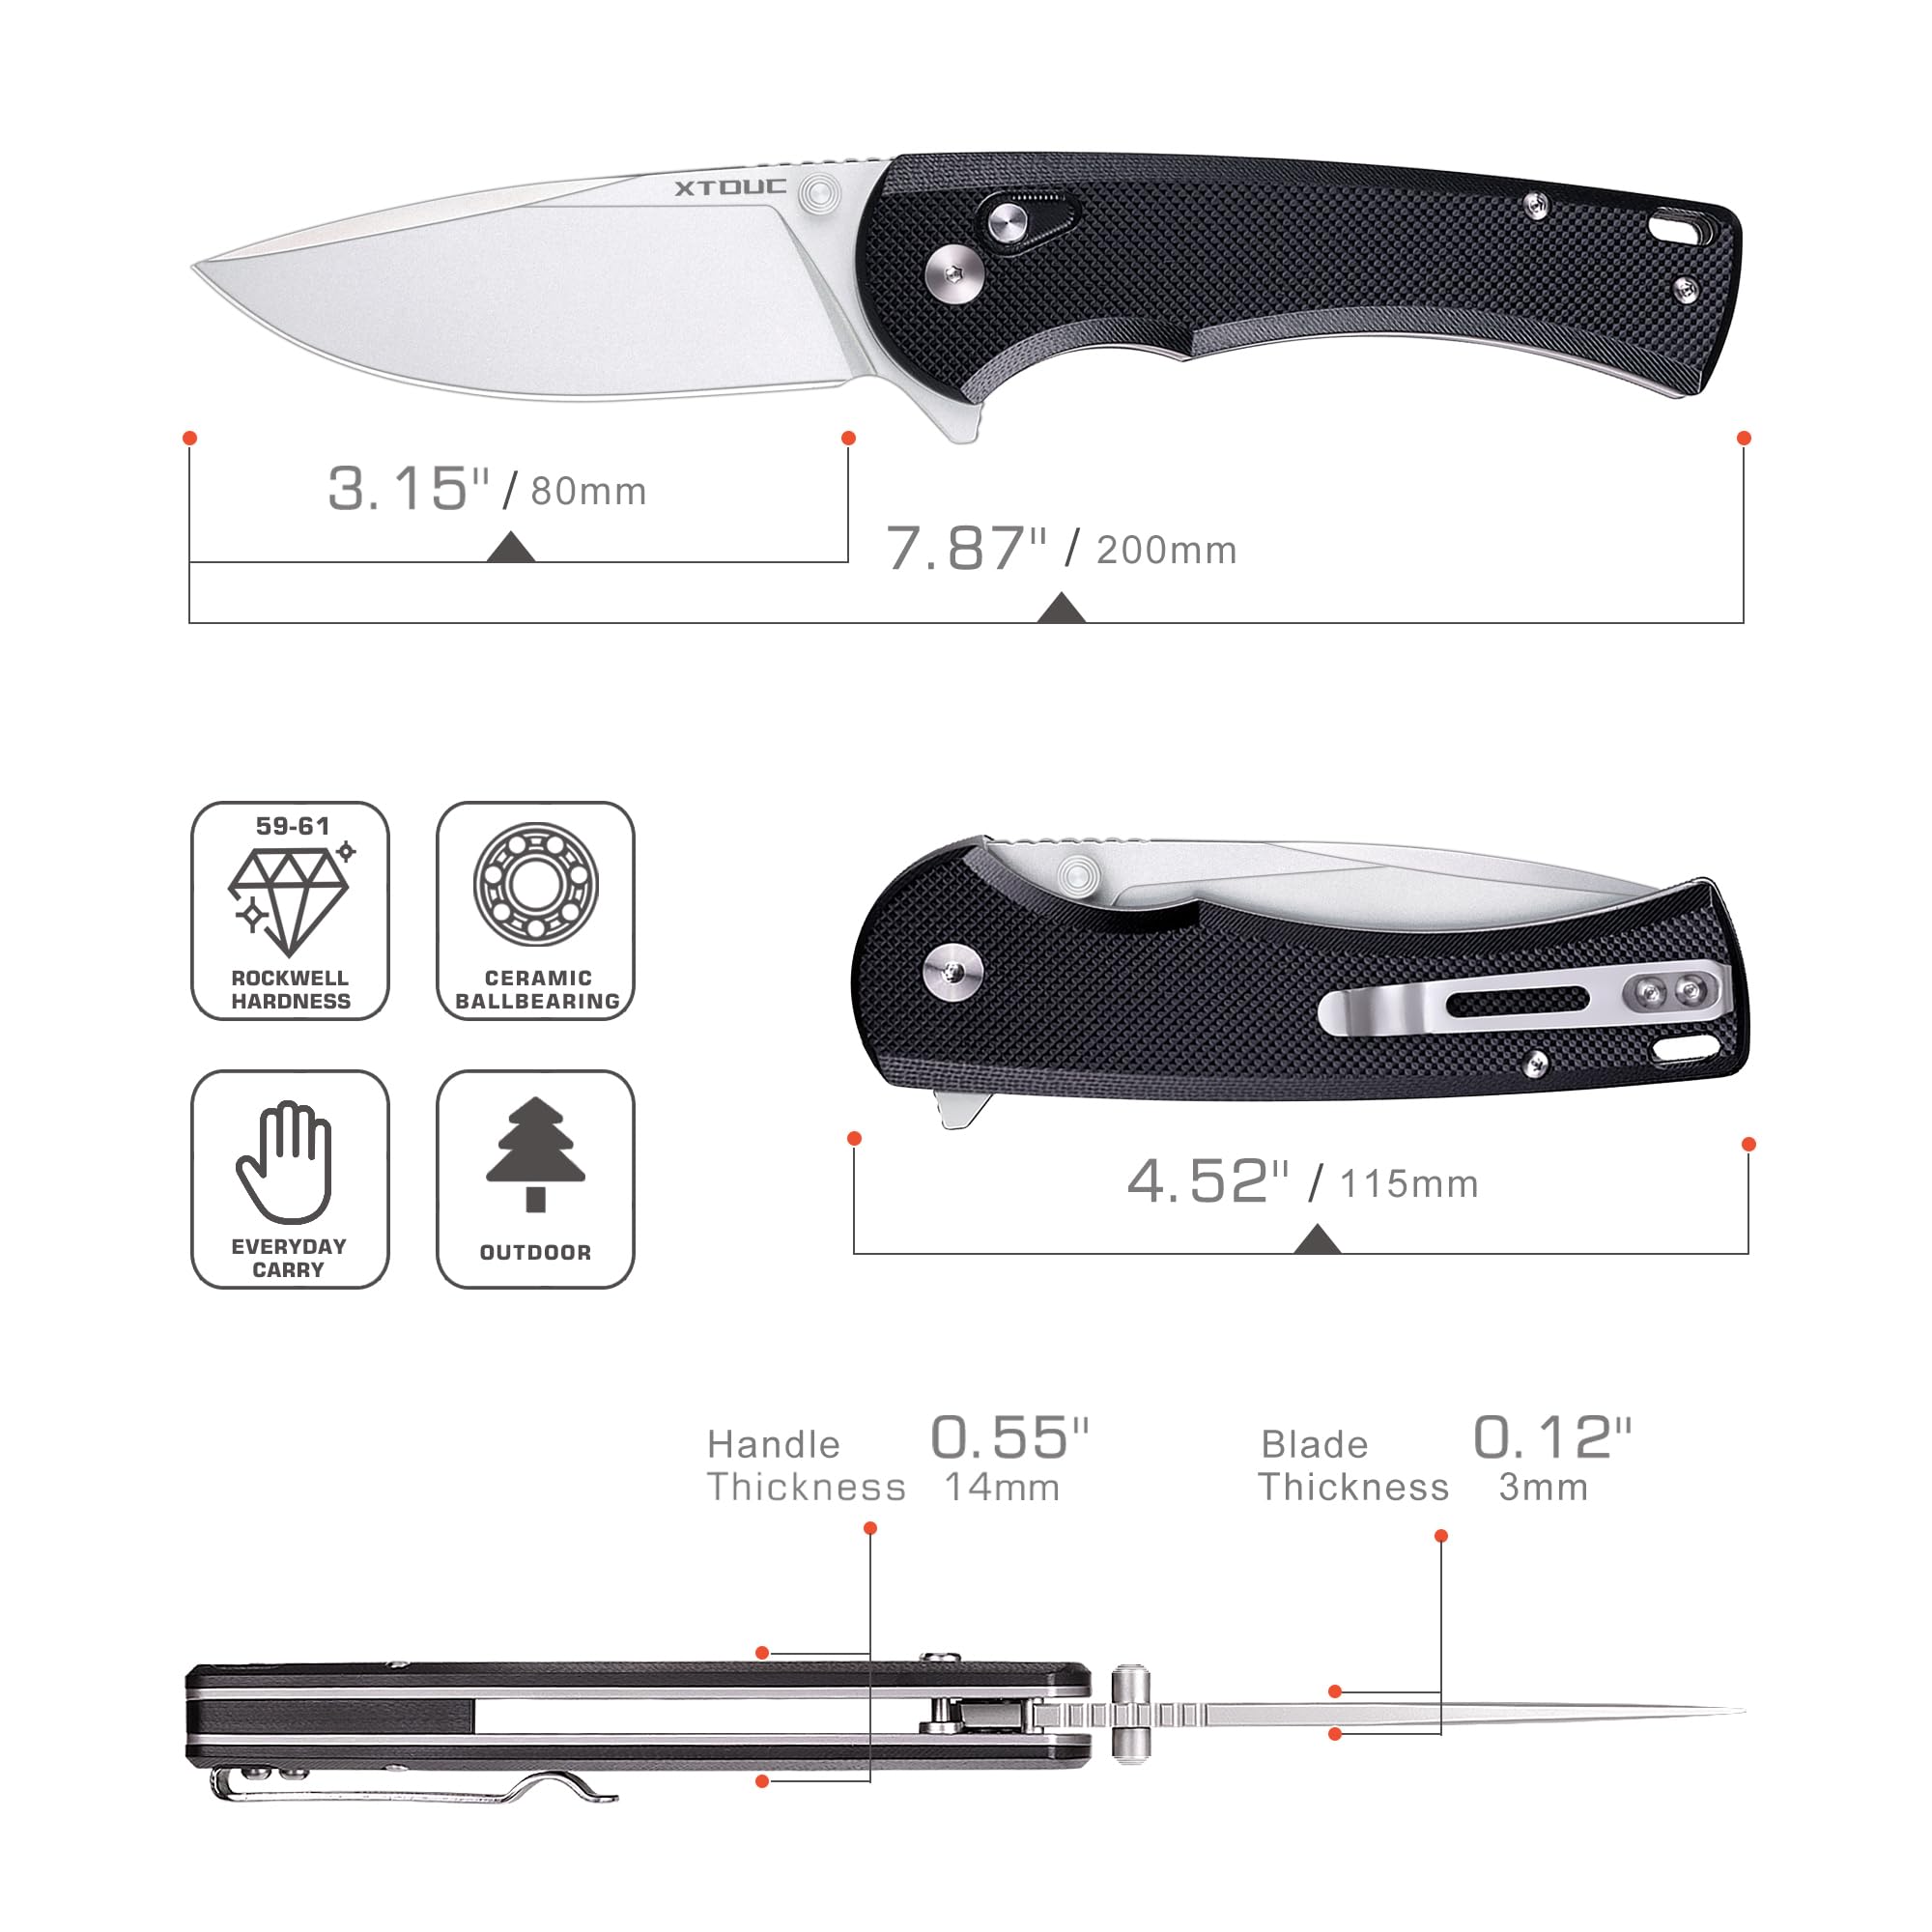 XTOUC Folding Knife EDC Pocket Knife: Button Lock 14C28N Blade Lightweight G10 Handle Camping Knives-Outdoor Hiking for Men